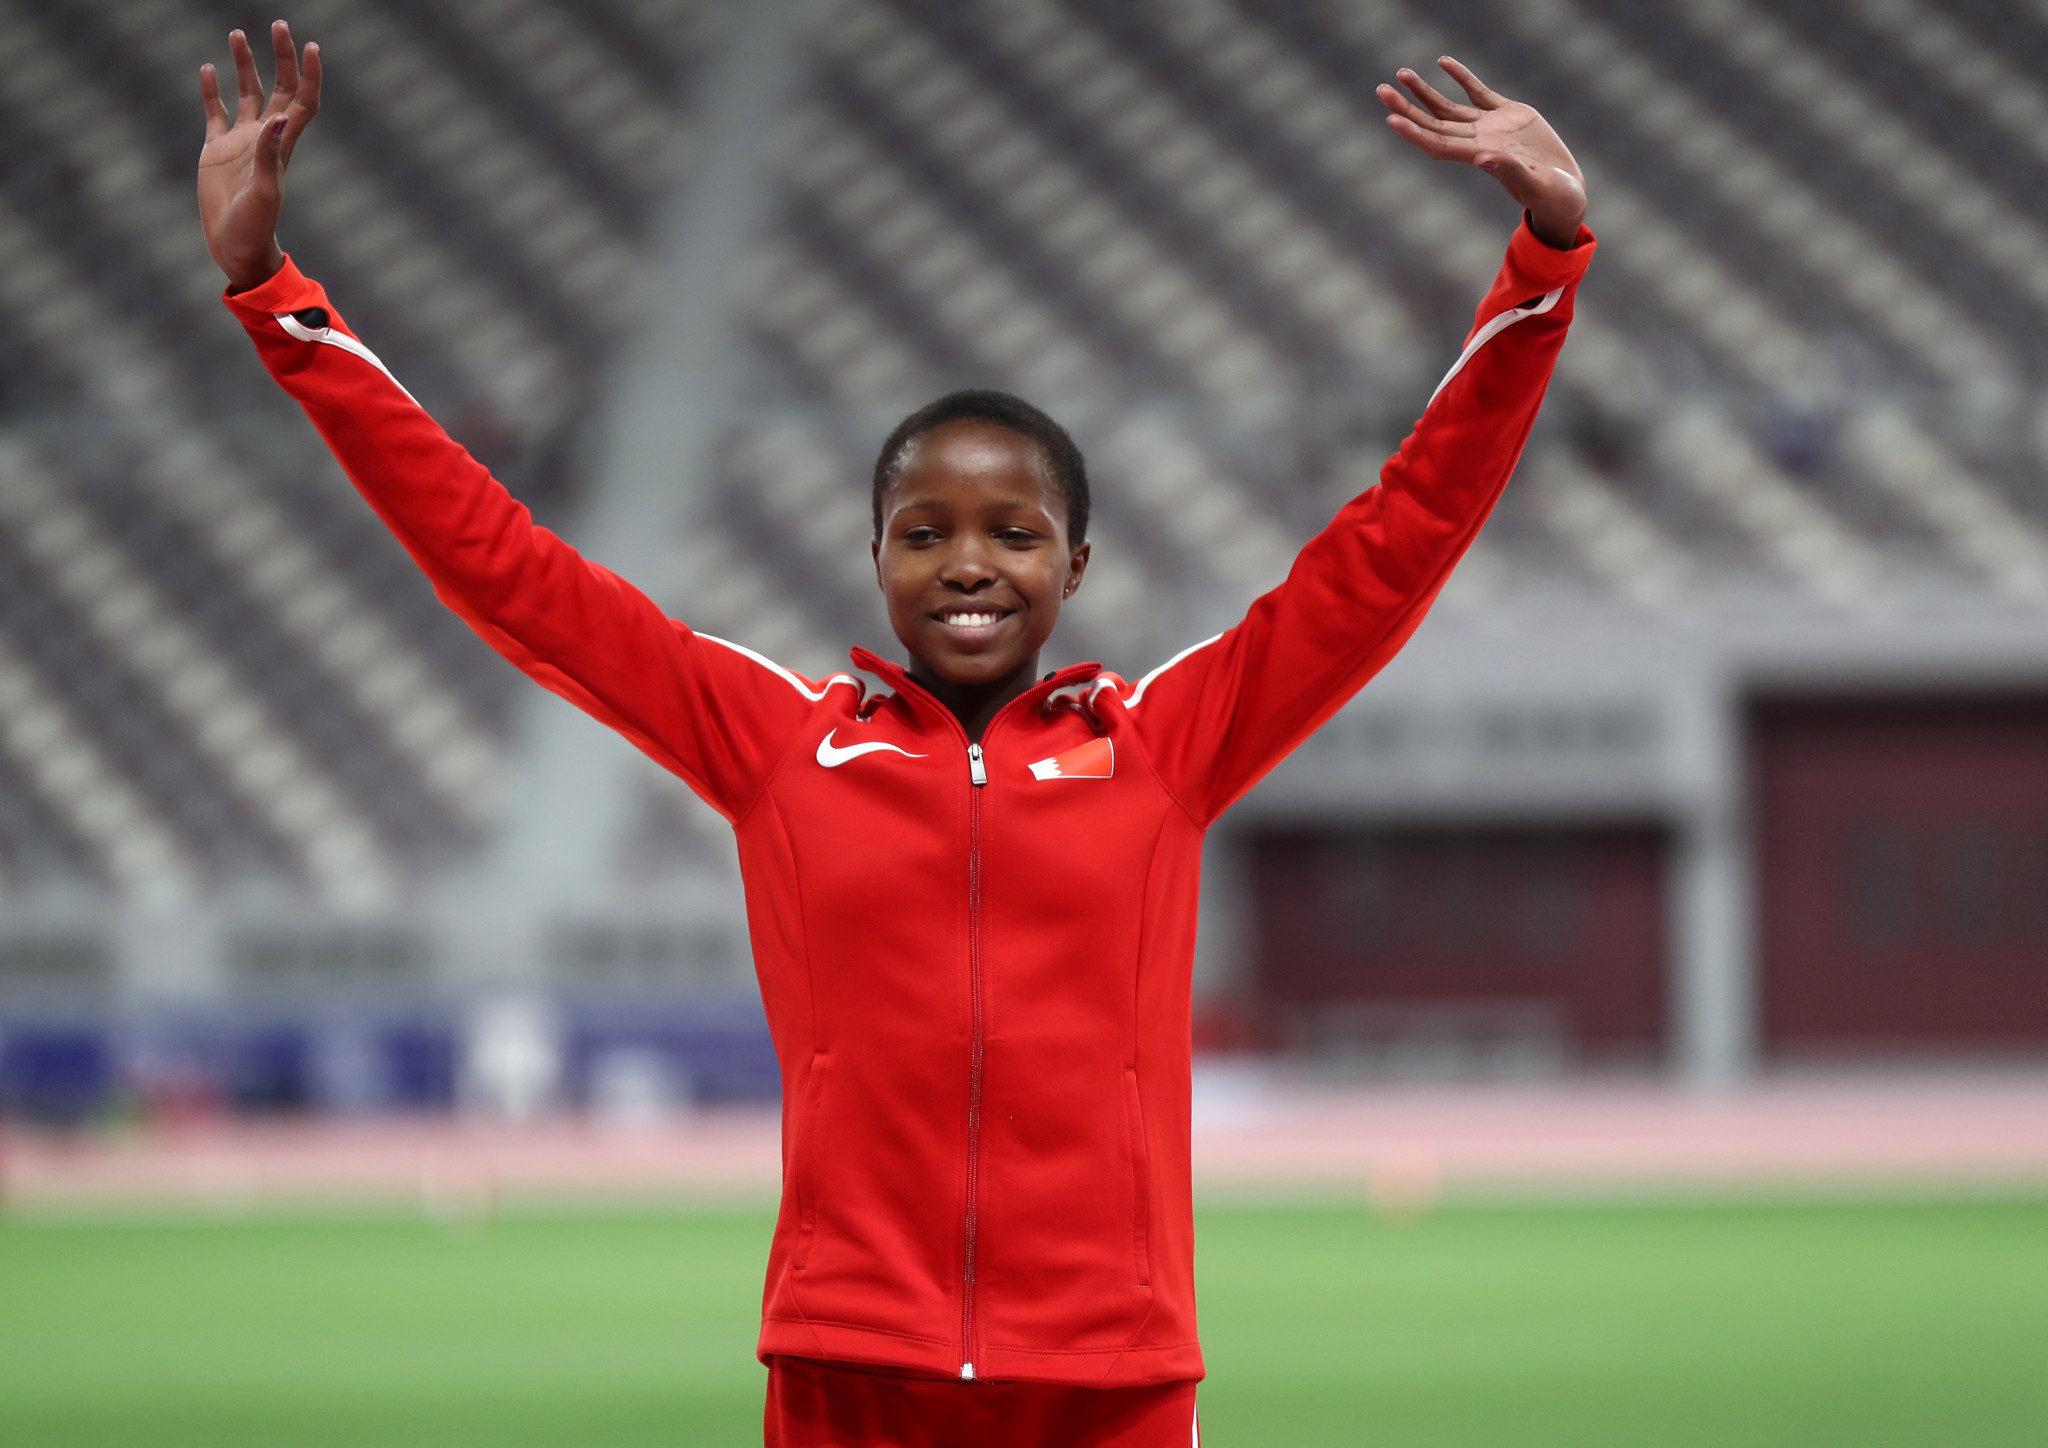 Bahrain's Winfred Mutile Yavi triumphed in the women's 5,000m event ©Getty Images